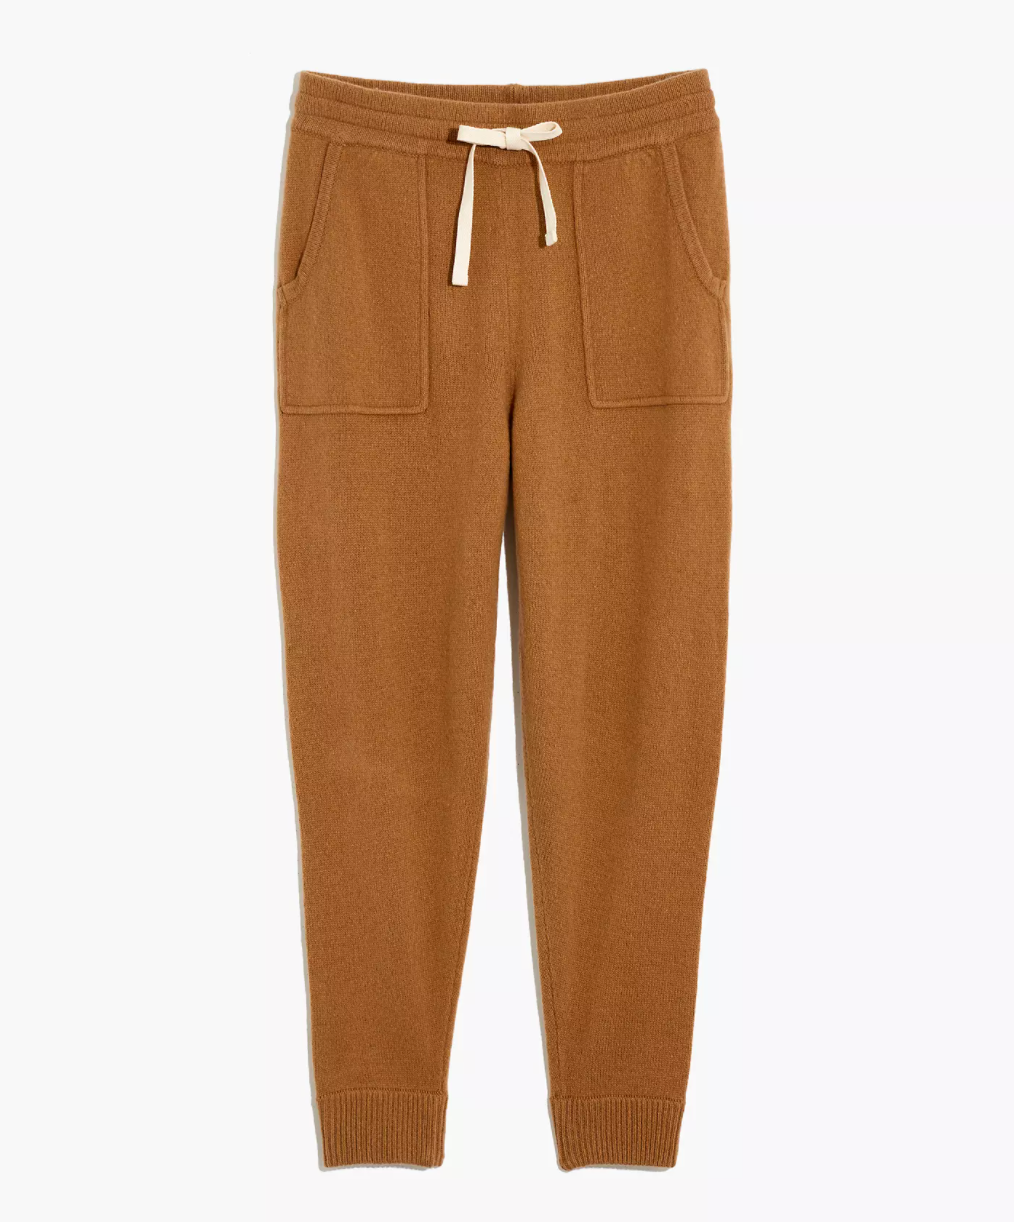 Madewell + (Re)sourced Cashmere Jogger Sweatpants